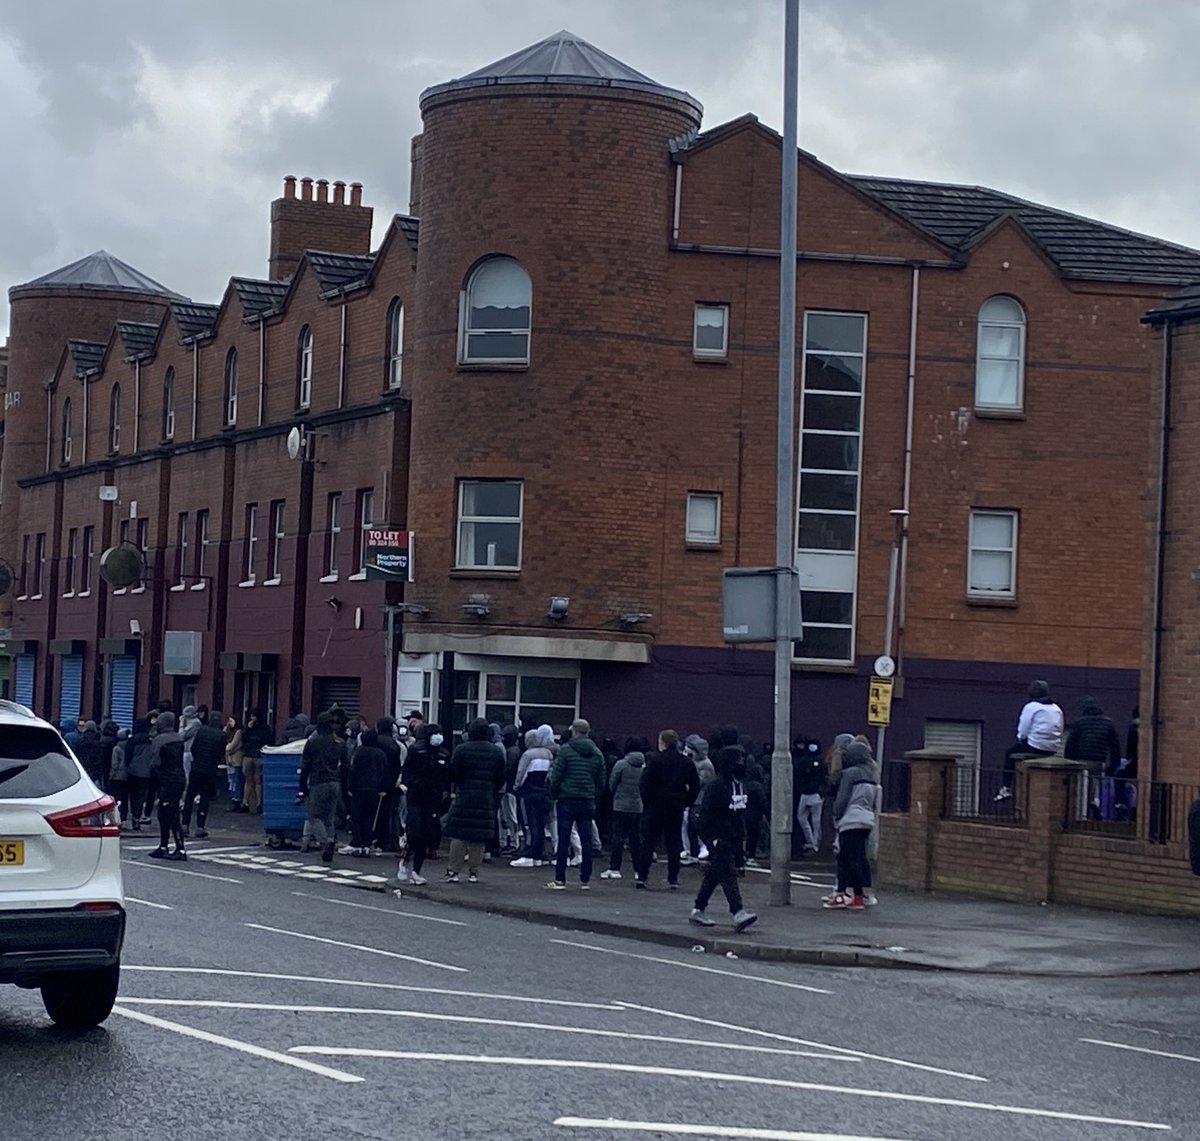  Things are relatively quiet here on the Springfield Road although crowd seems to be getting bigger. Good to see some youth workers have arrived at the scene to engage with the groups. No sign of PSNI